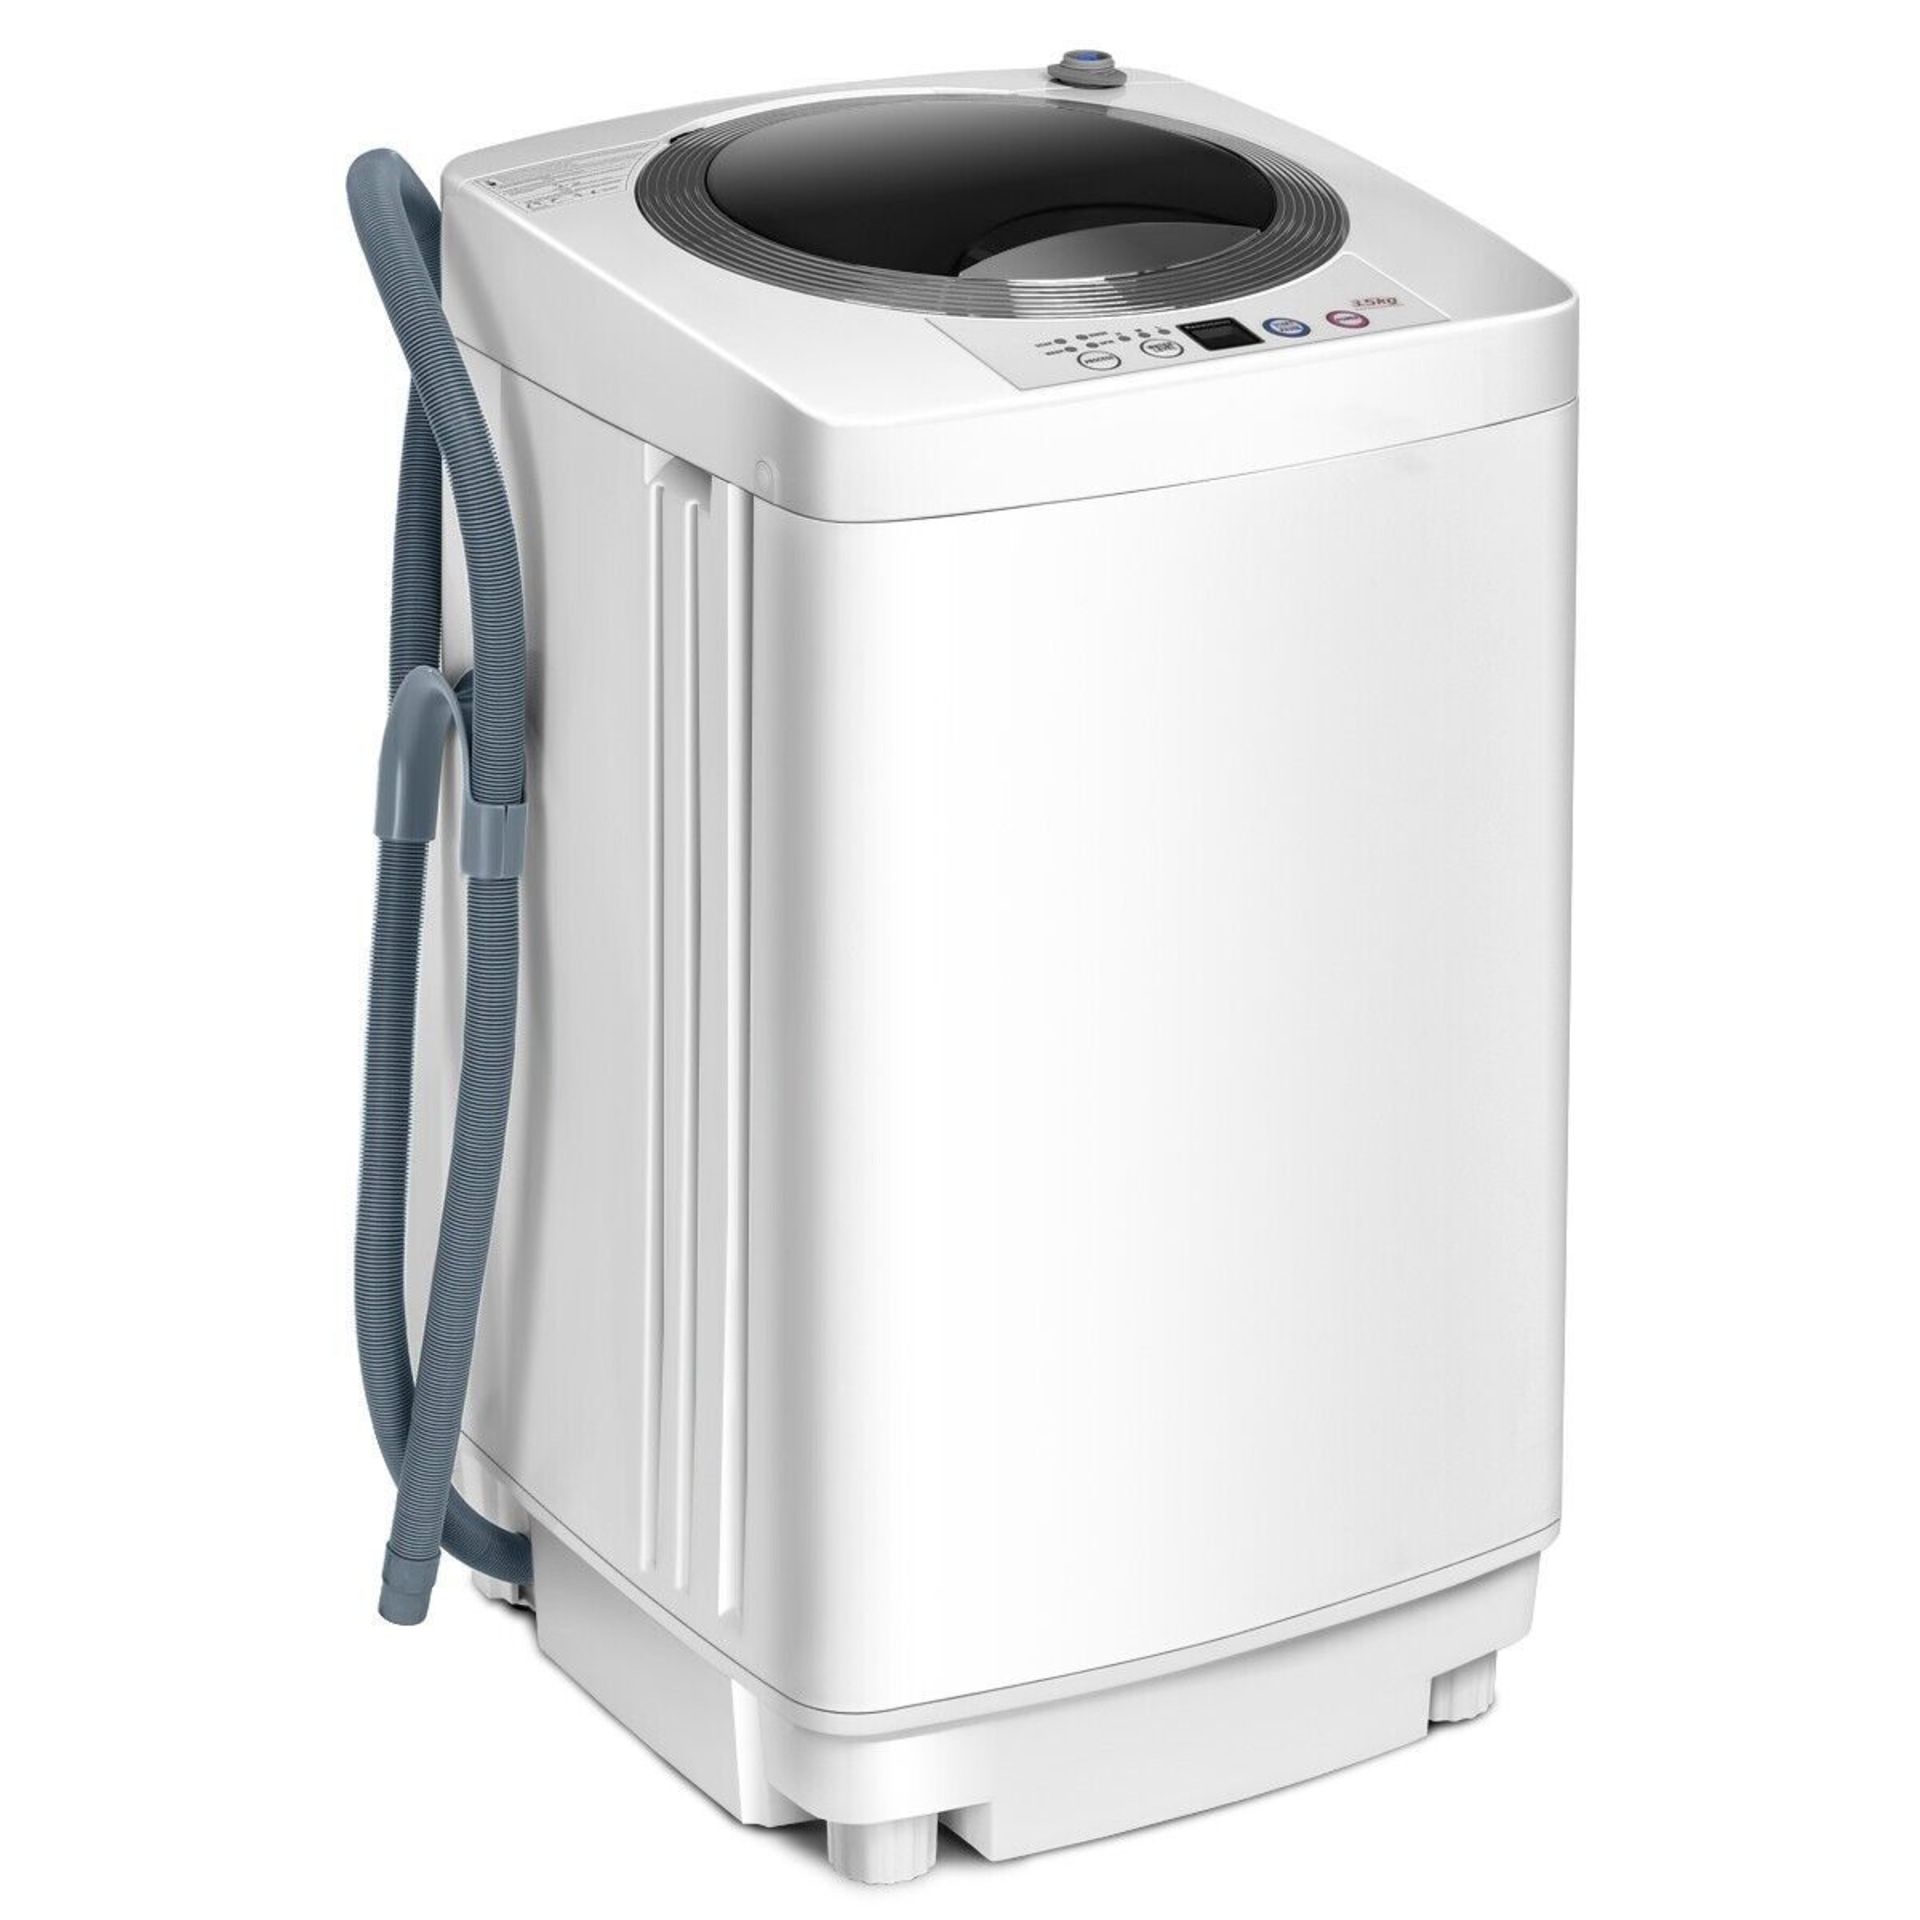 2 in 1 Portable Compact Full-Automatic Washing Machine Washer/Spinner 3.5kg Load. - ER53. This